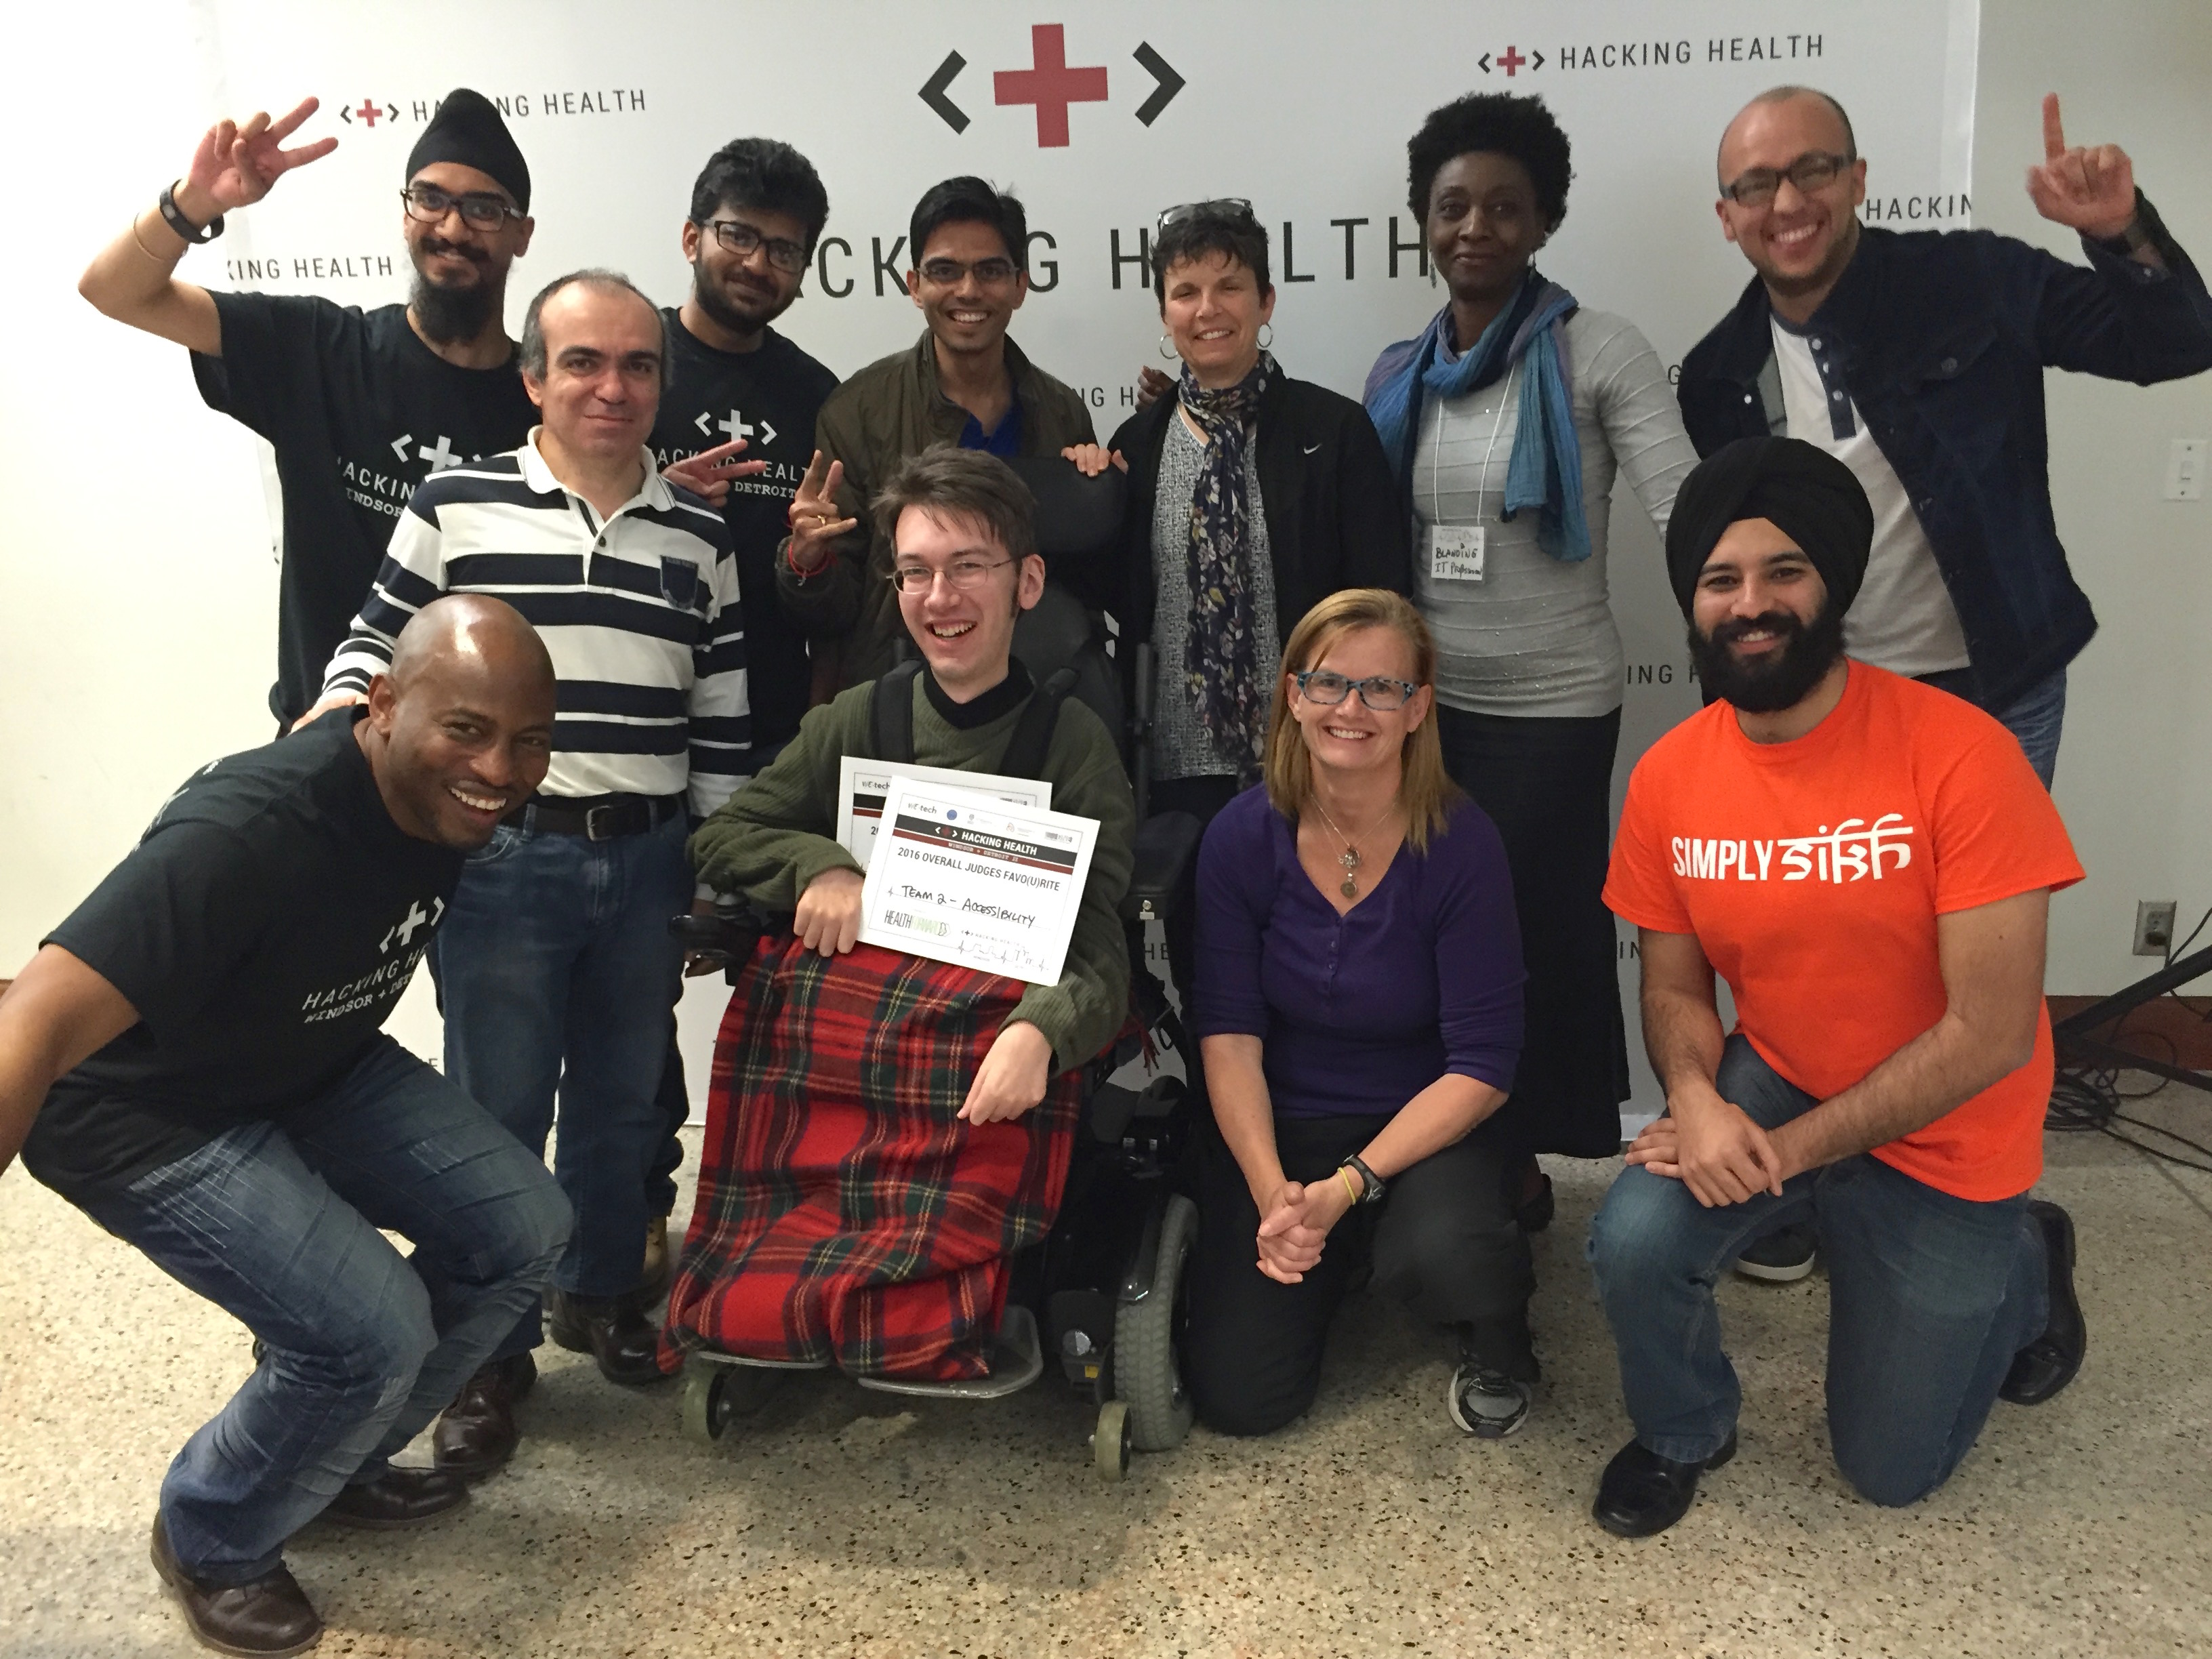 Judge's Favourite & Best Team from Canada - Team 2 - Accessibility